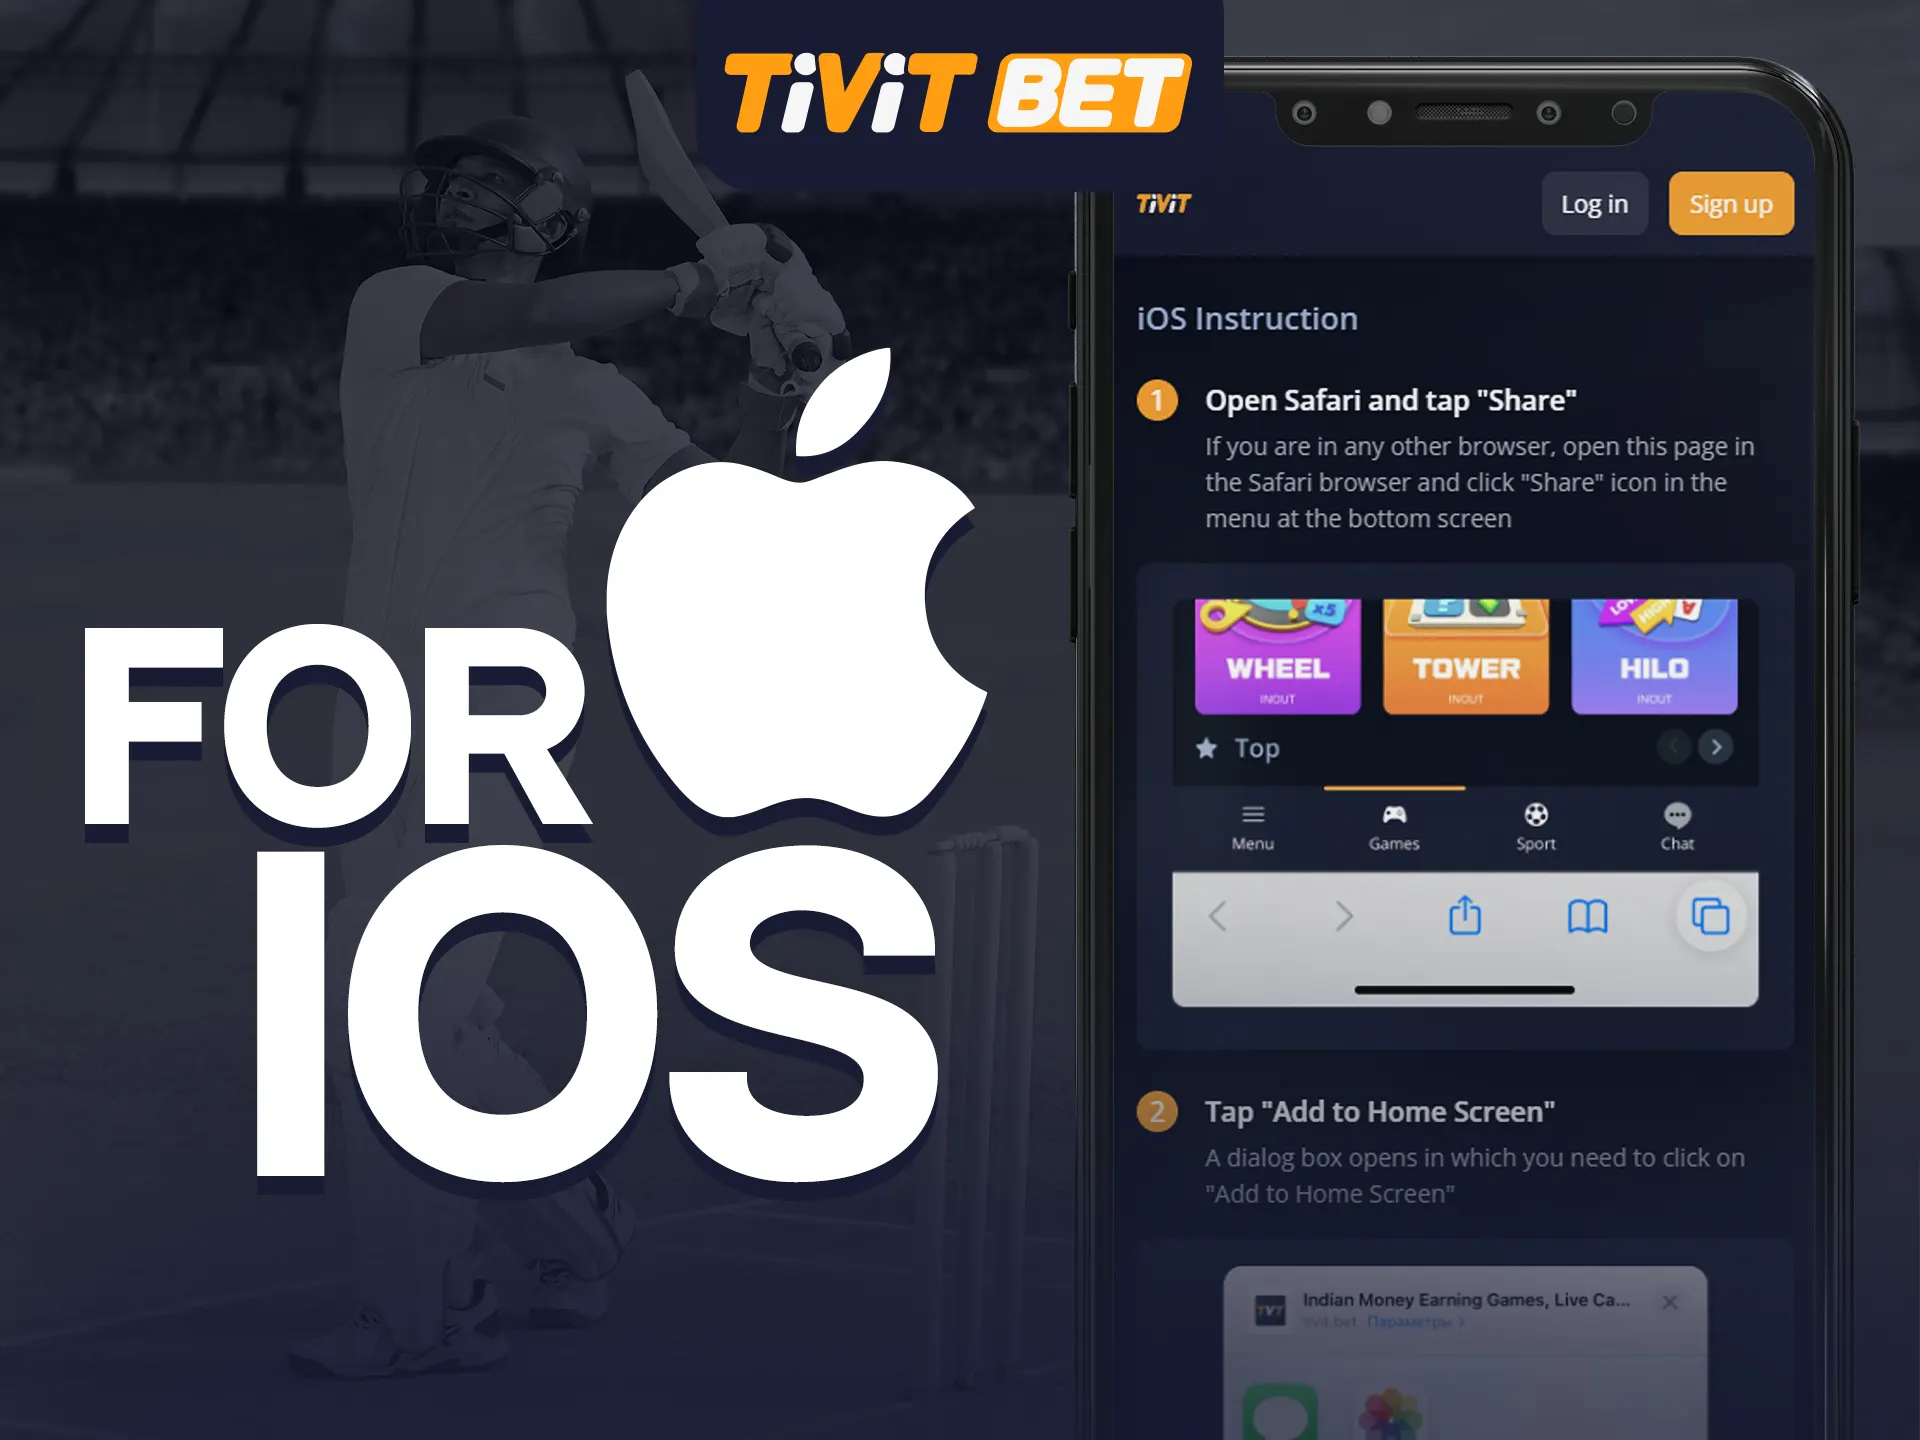 The Tivit Bet app for iOS can be downloaded directly from the AppStore.